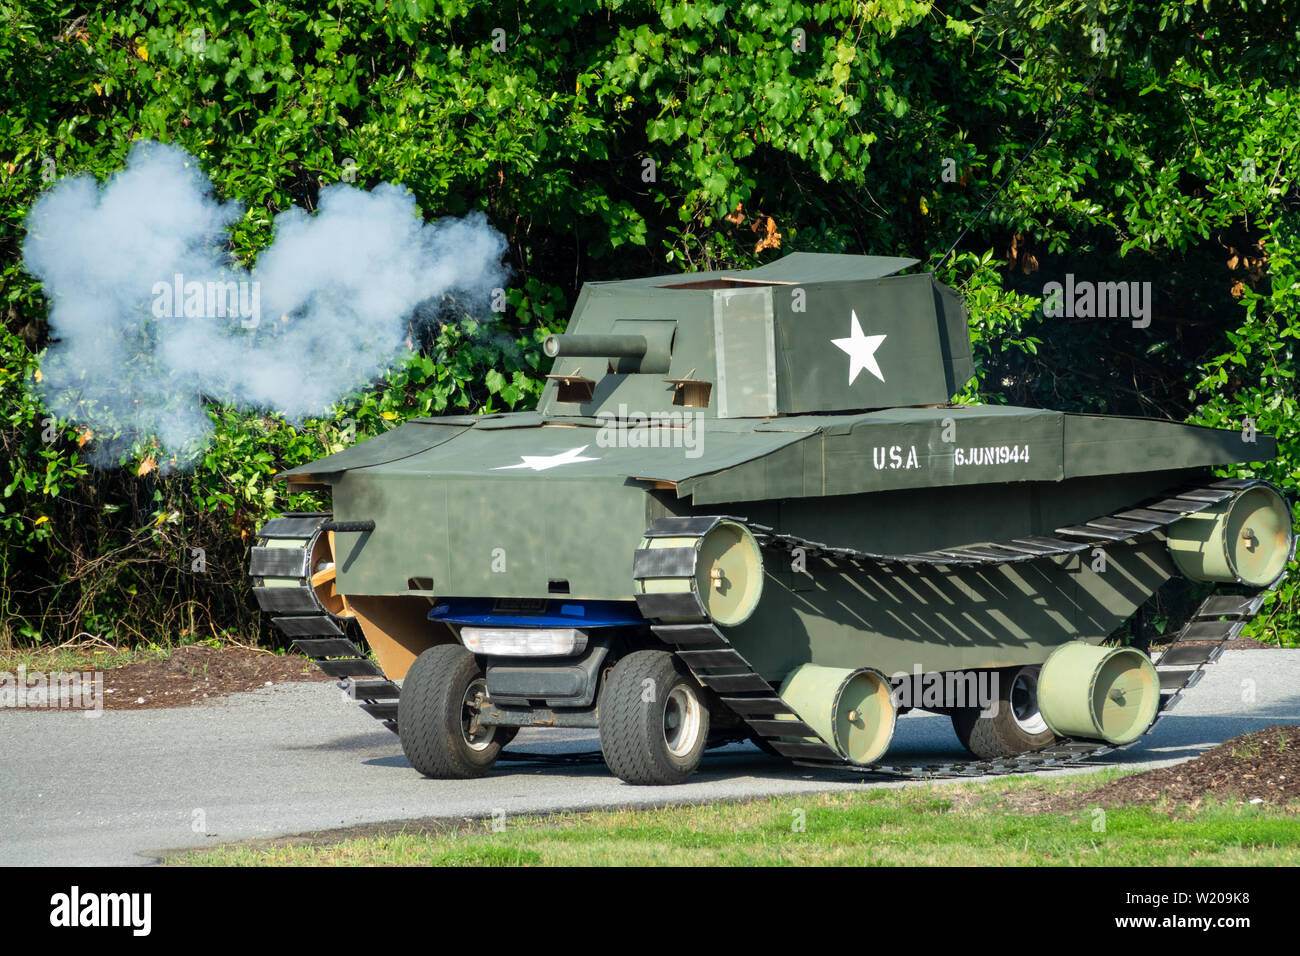 Sullivans Island South Carolina, USA. 4th July, 2019. A golf cart decorated as a military tank fires blanks from the cannon during the annual Independence Day parade July 4, 2019 in Sullivan's Island, South Carolina. The tank was a tongue-in-check reference to the controversy over the military parade in Washington. Credit: Planetpix/Alamy Live News Stock Photo